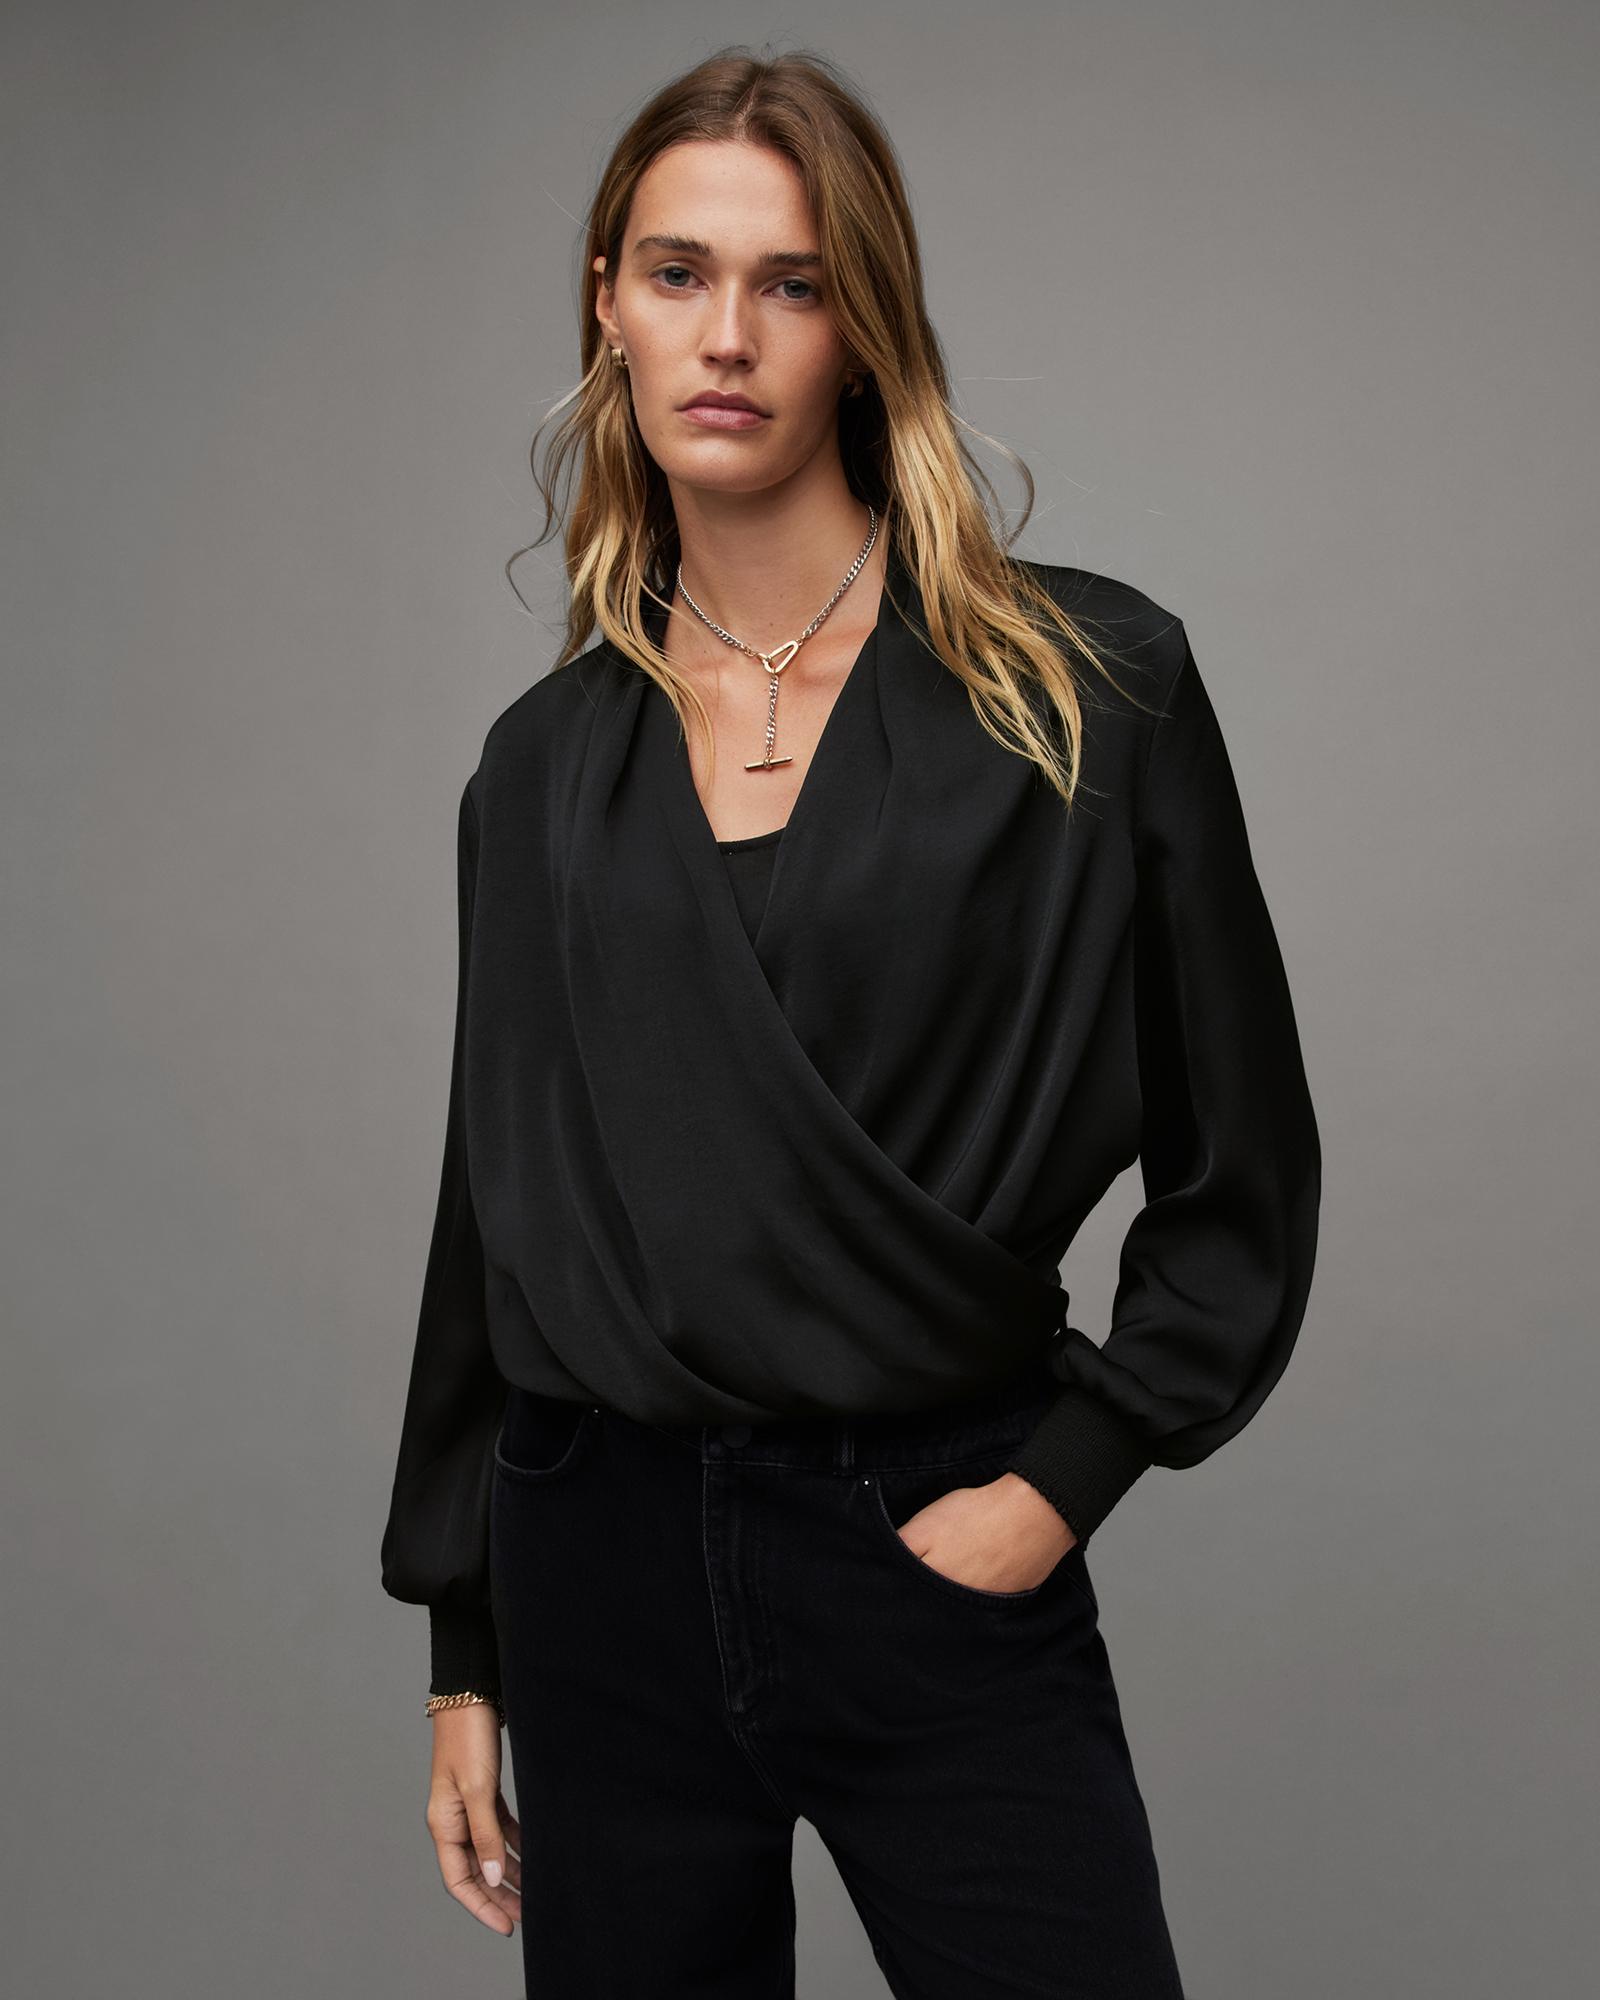 AllSaints Abi Long Sleeve Draped Wrap Over Top Product Image